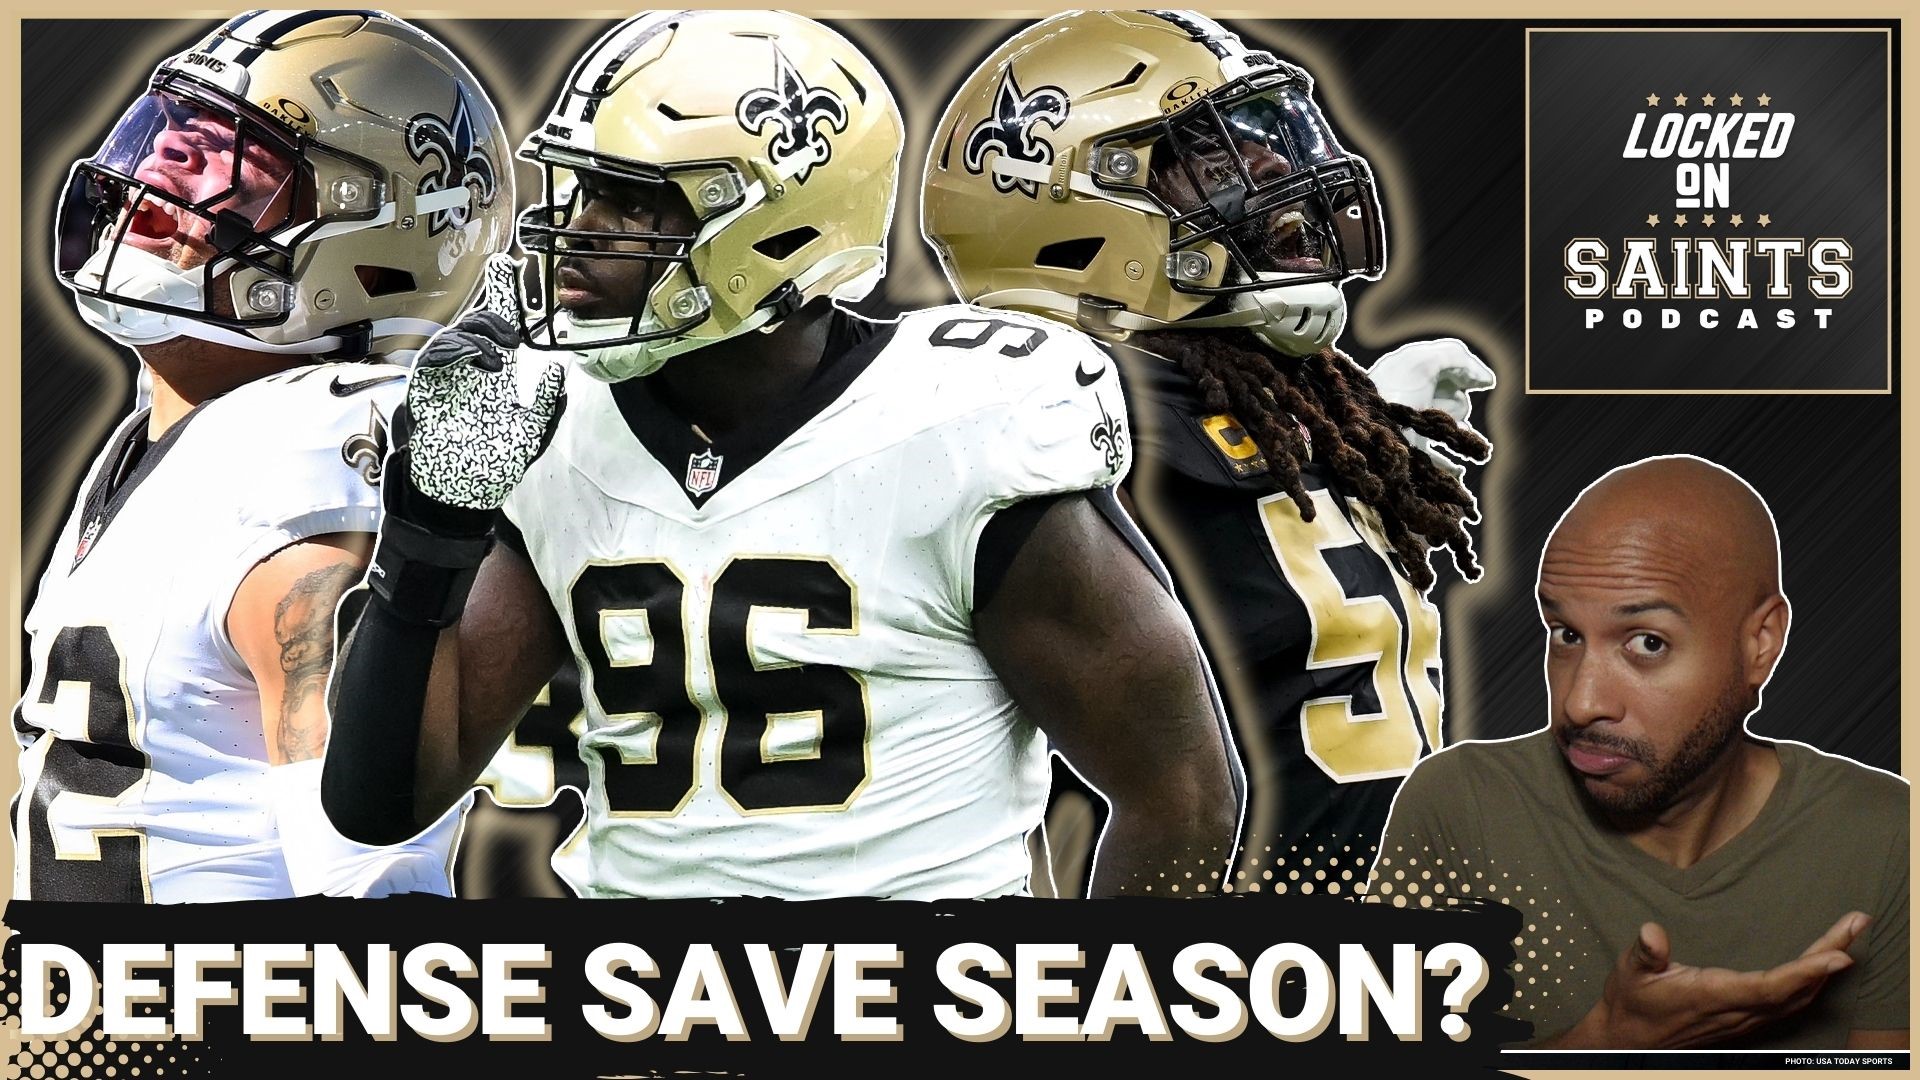 The New Orleans Saints defense has been its most consistent unit even with all of its challenges. Particularly in coverage.